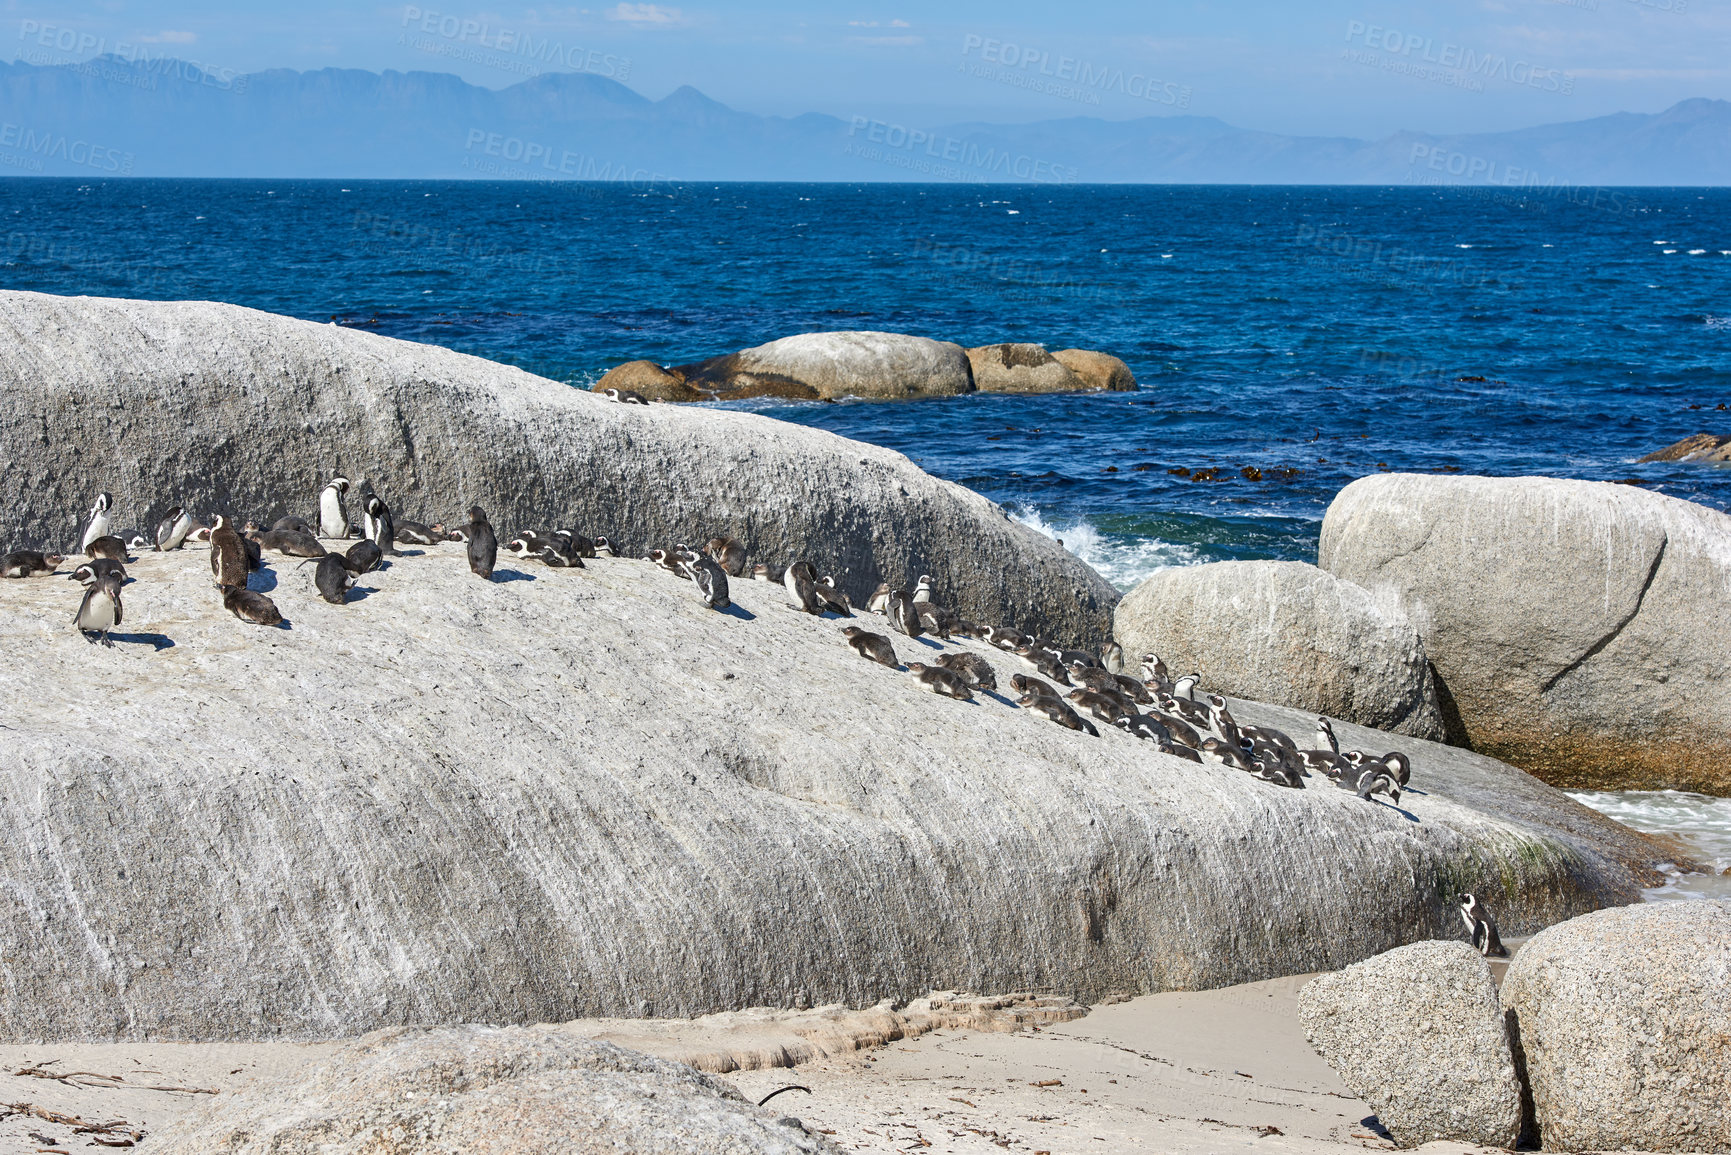 Buy stock photo Group of black footed penguins at Boulders Beach, South Africa gathered at the sea shore. Colony of endangered jackass or cape penguins from the spheniscus demersus species in their natural habitat